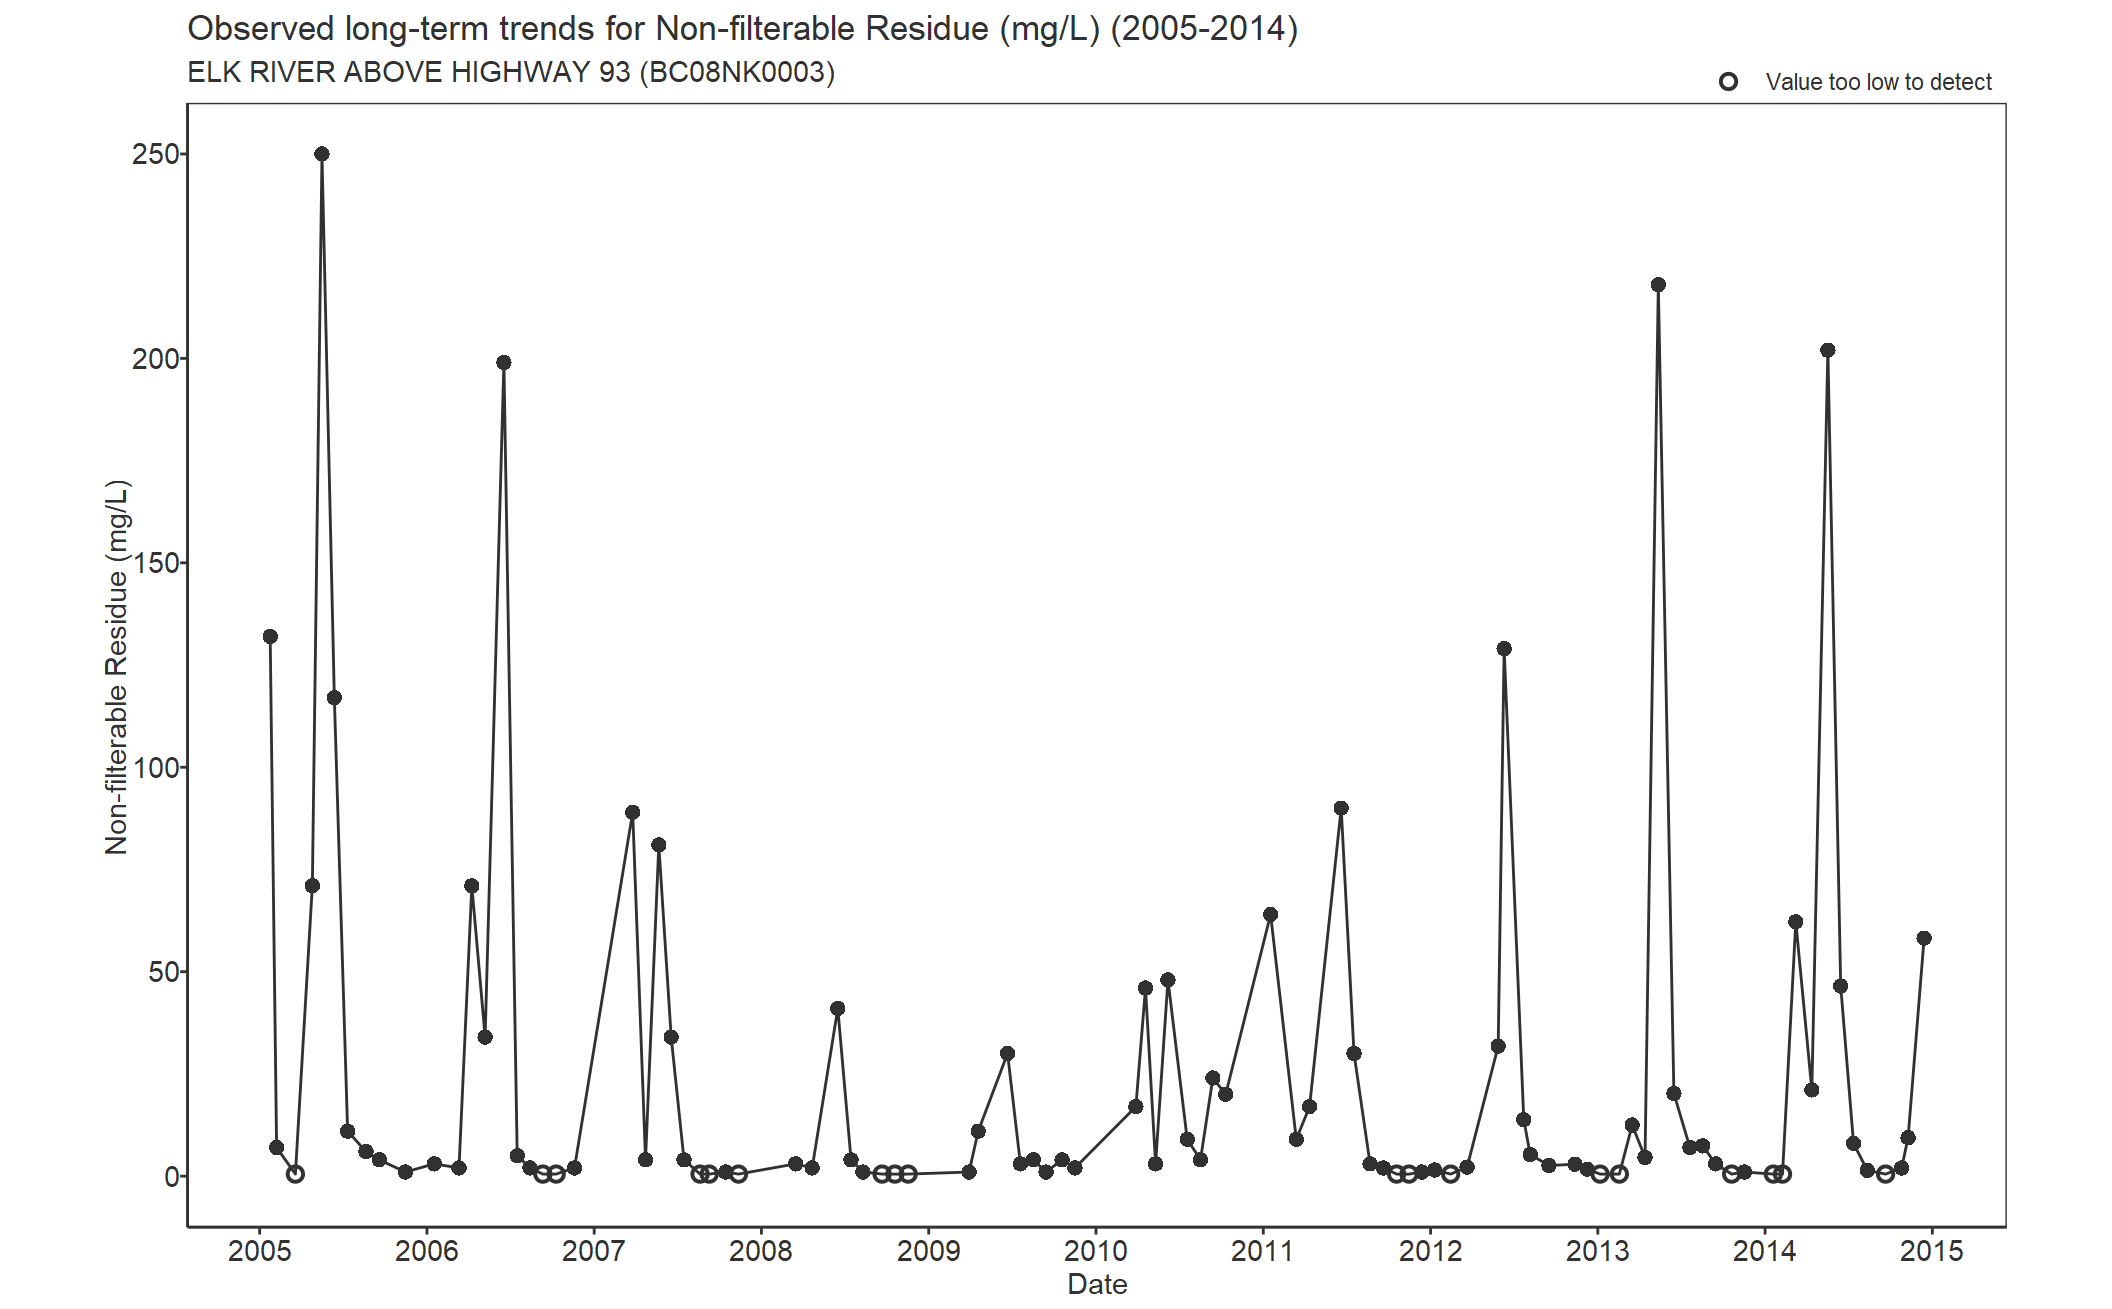 Observed long-term trends for Residue Nonfilterable (2005-2014)